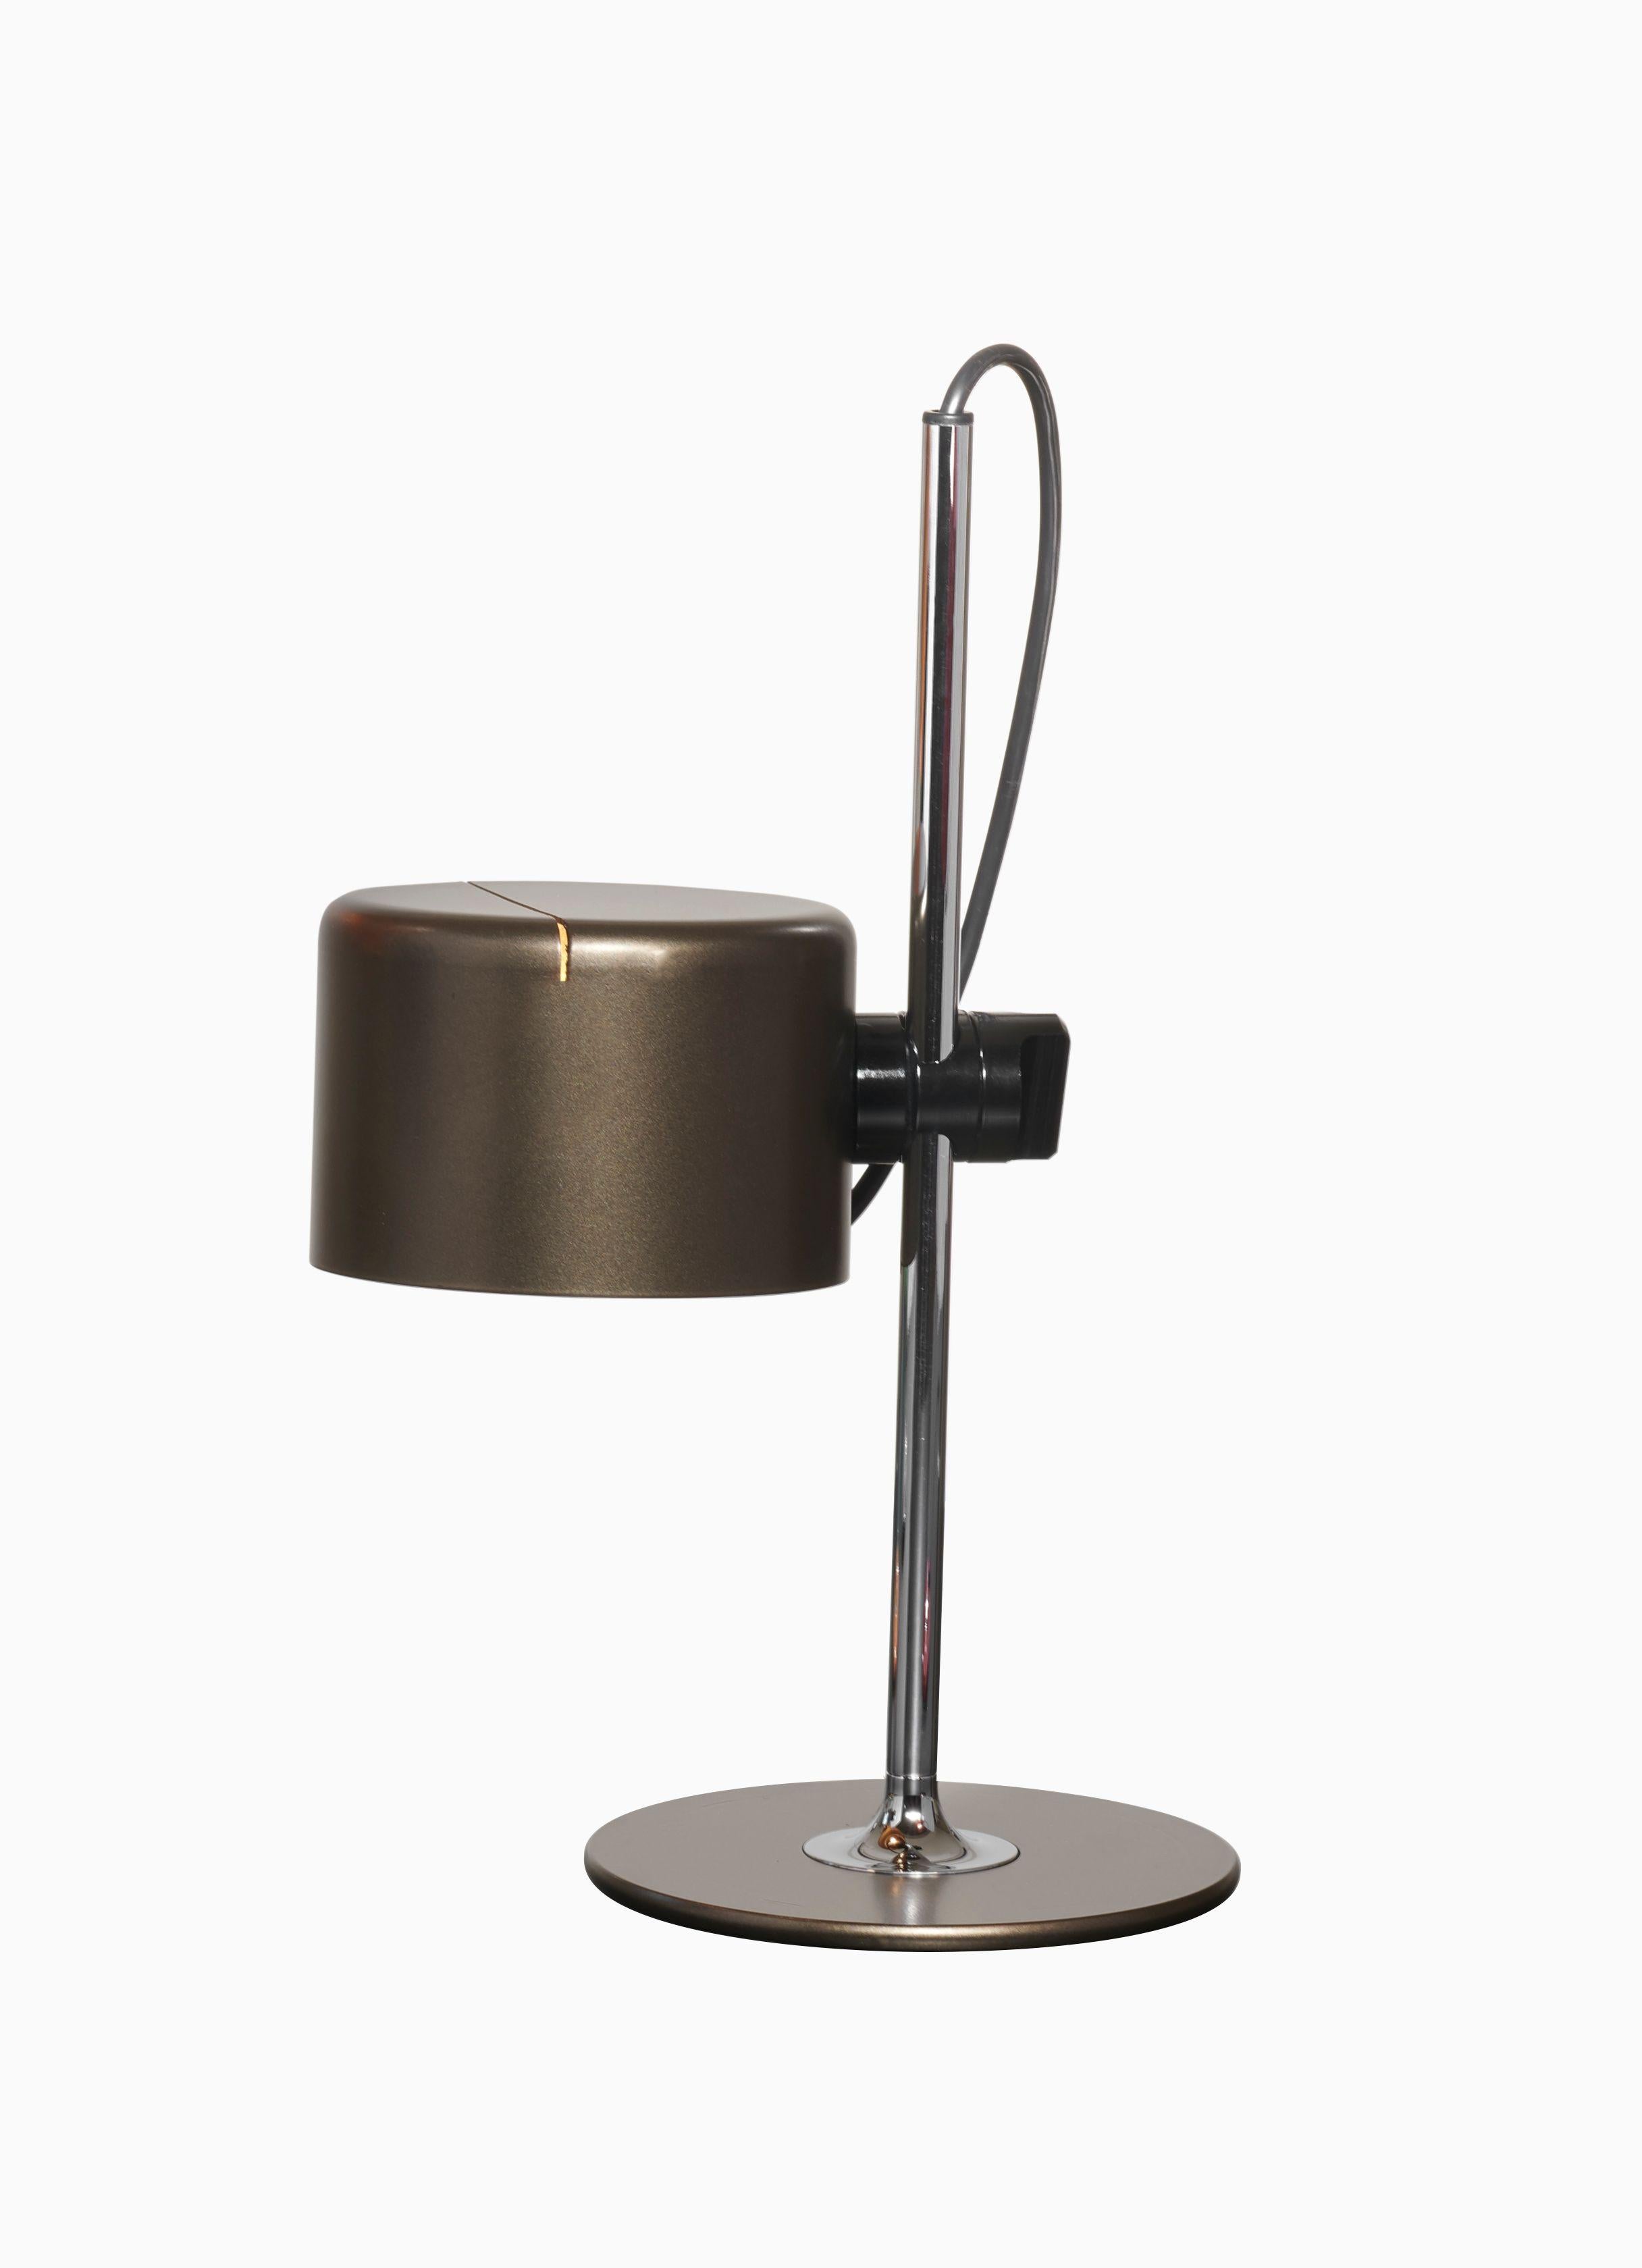 Spanish Joe Colombo Mini Coupe Table Lamp by Oluce For Sale